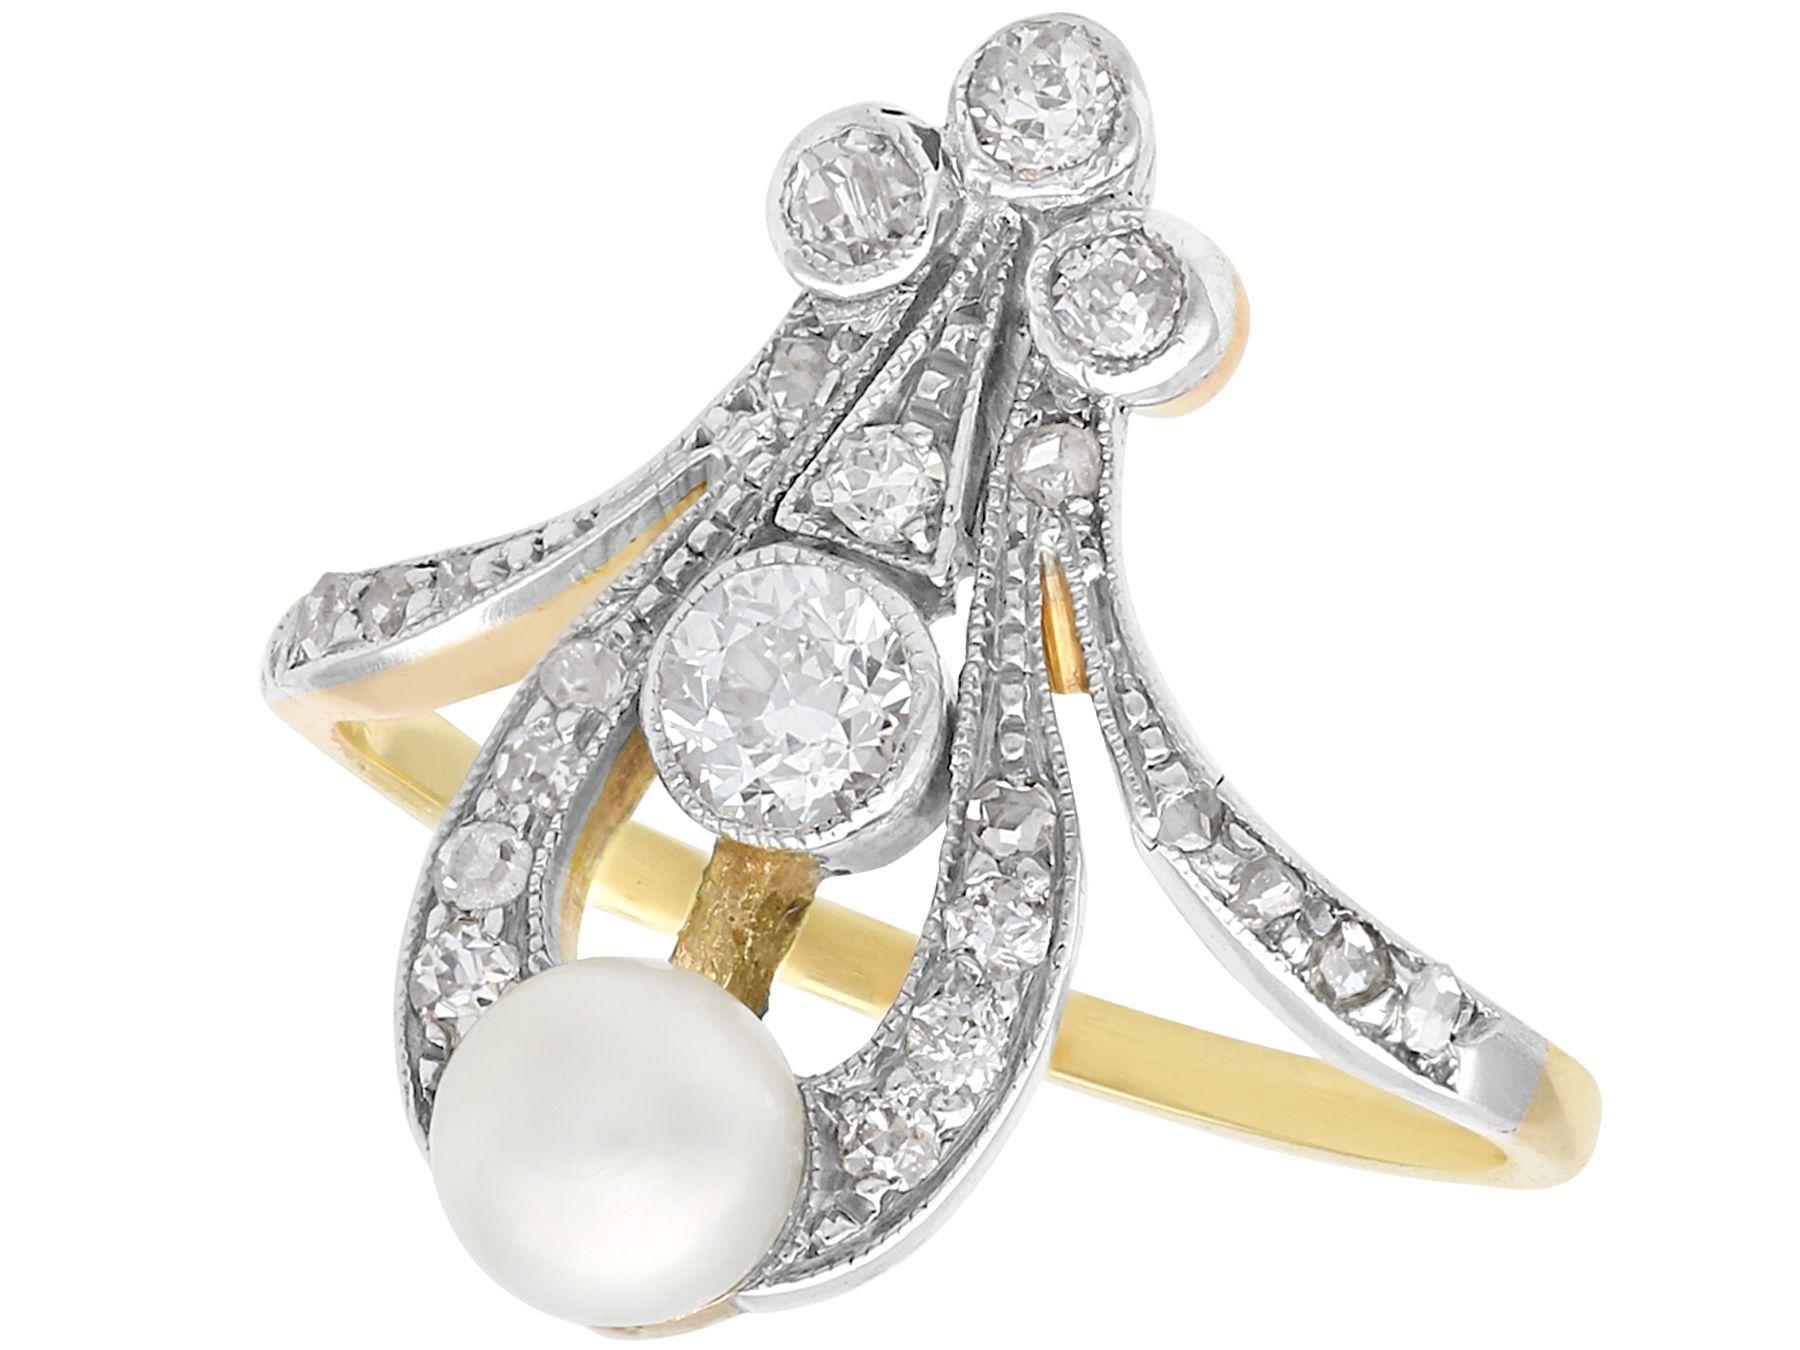 A stunning, fine and impressive antique 0.45 carat diamond and pearl, 14 karat yellow gold, silver set dress ring; part of our antique estate jewelry collections.

This stunning 1930s antique pearl and diamond ring has been crafted in 14k yellow